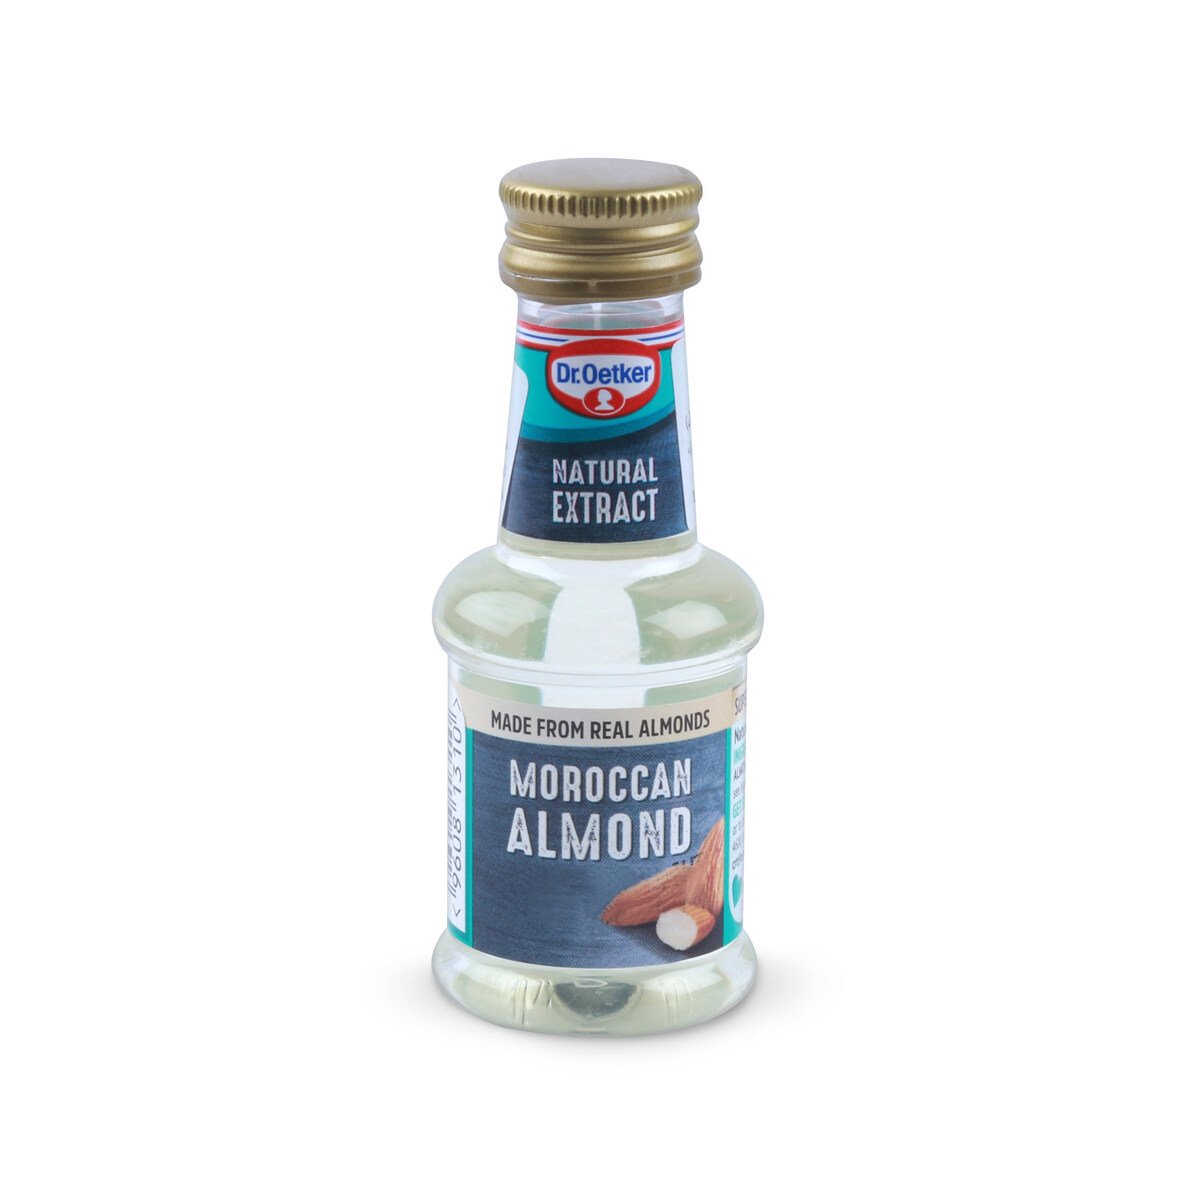 Dr.Oetker Dr .Oetker Natural Extract Moroccan Almond 35ml